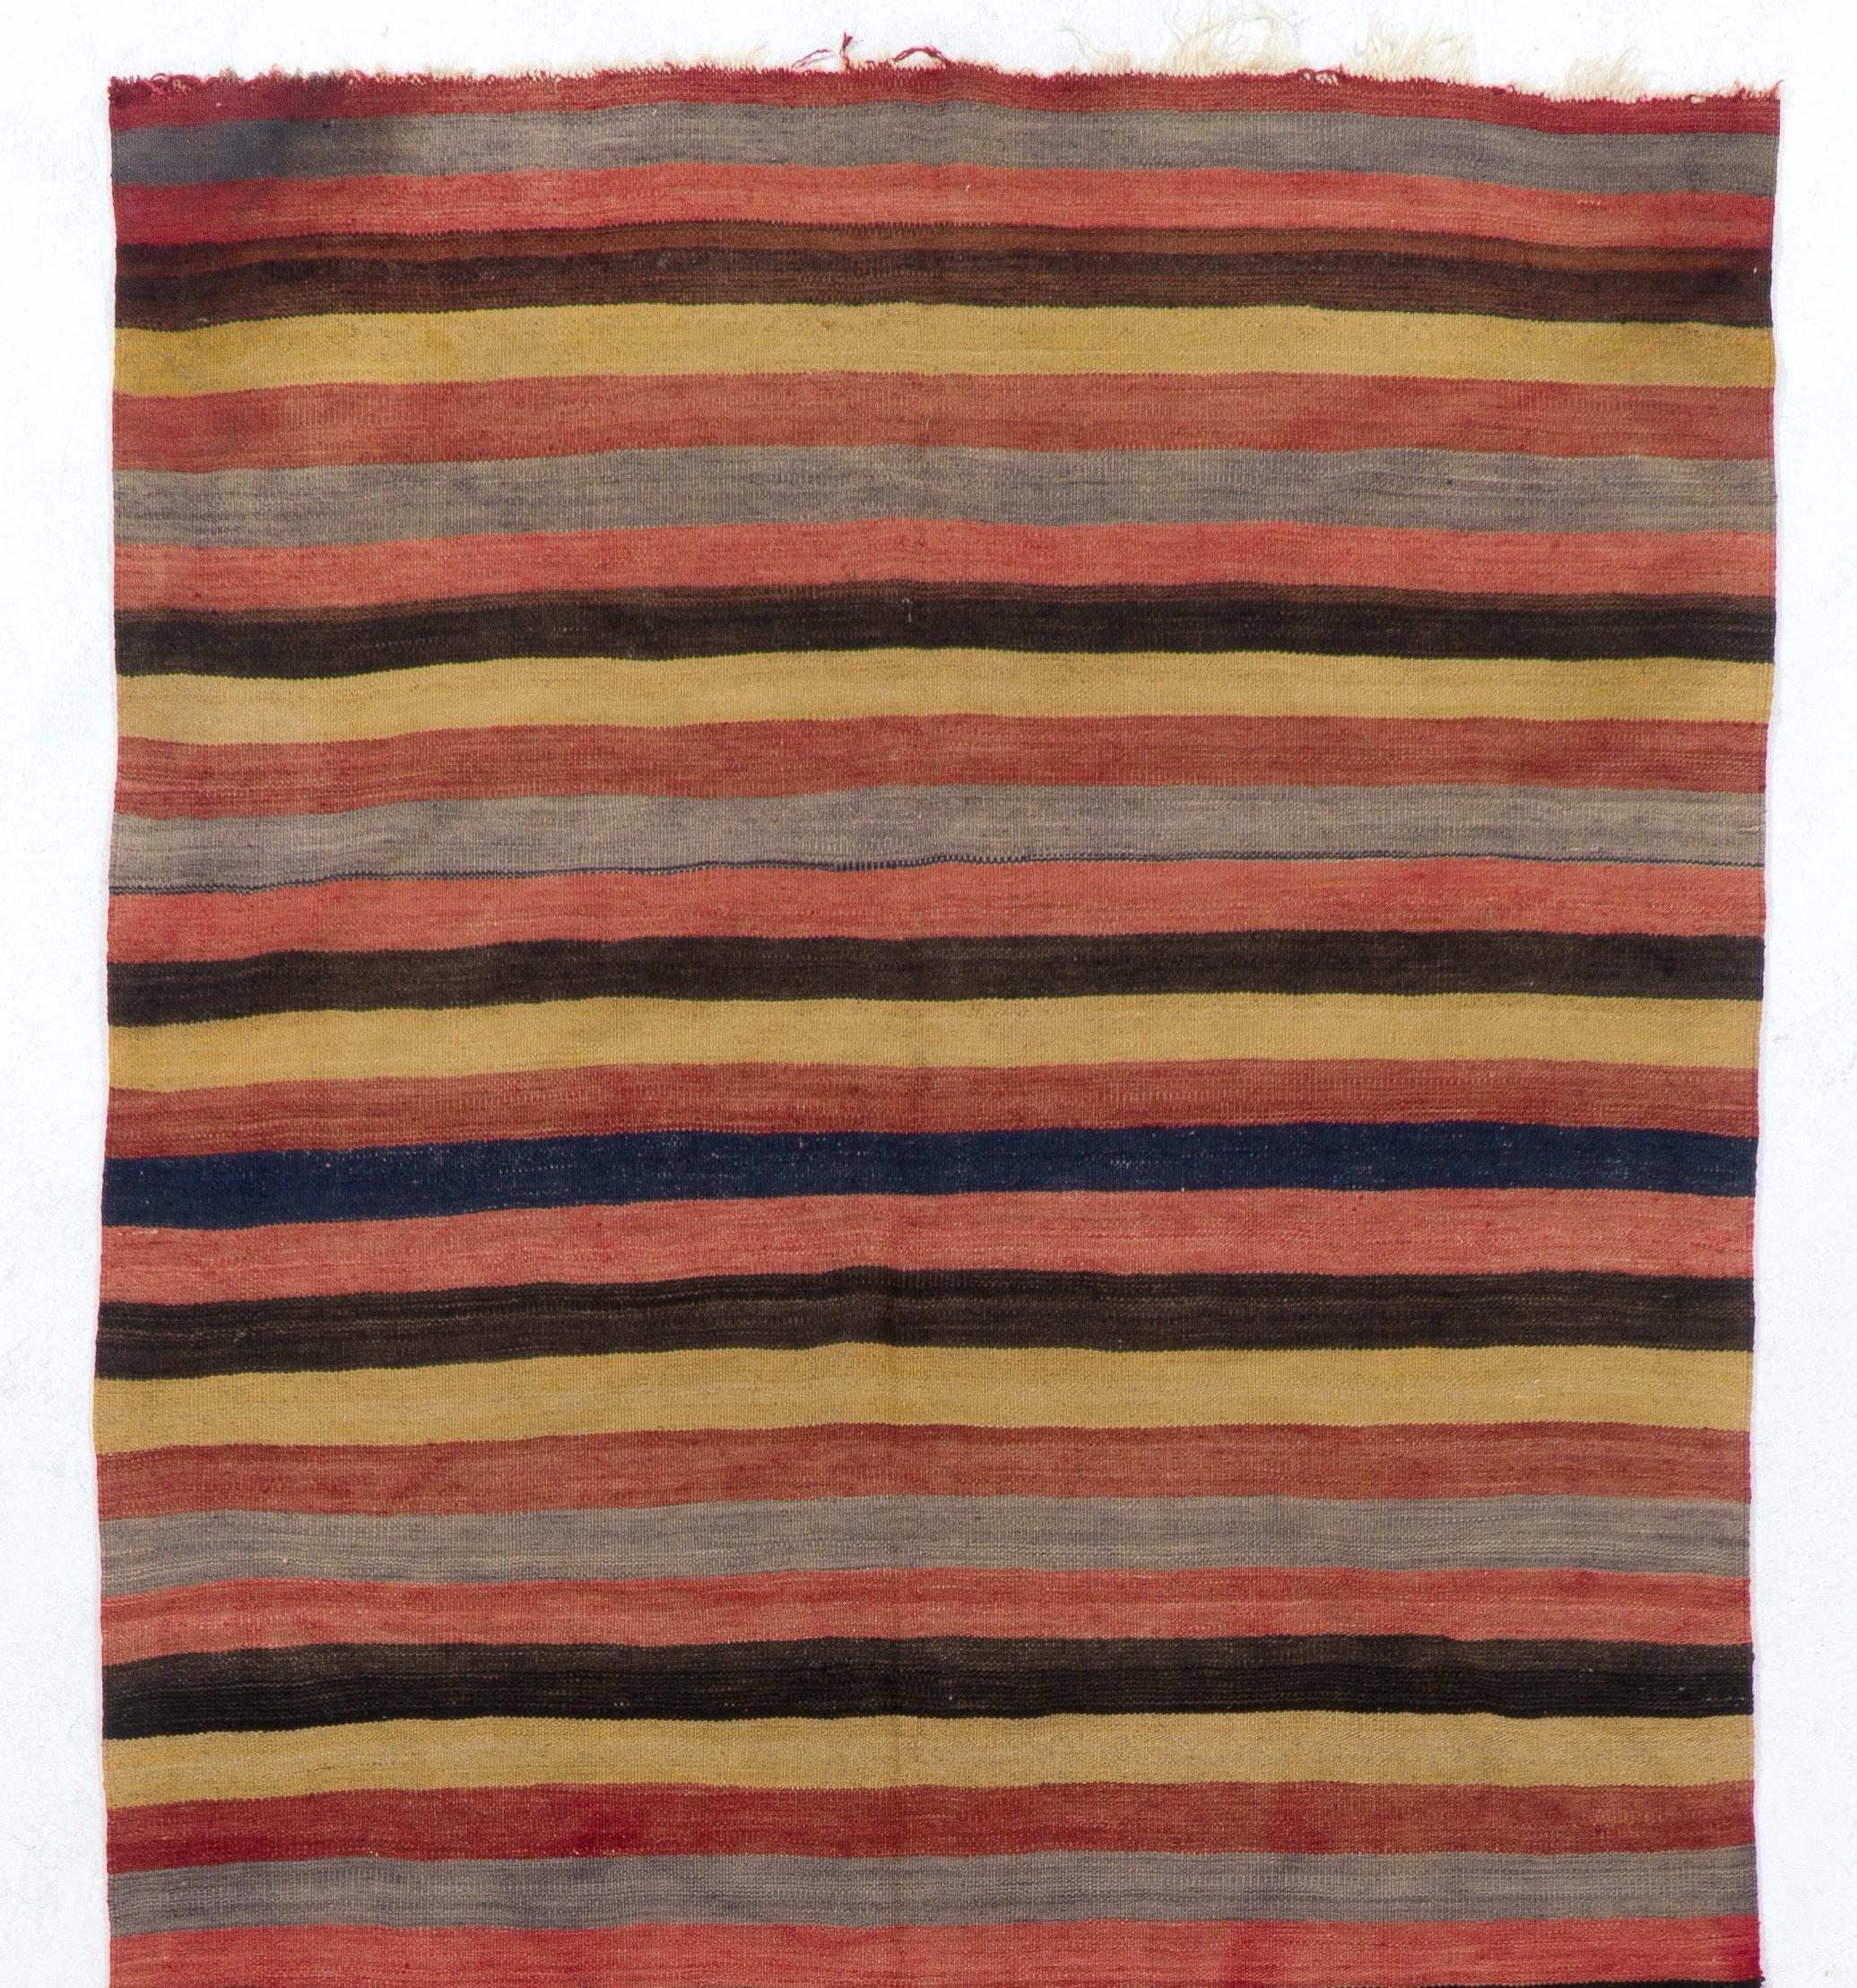 A simple yet beautiful wool rug handwoven by the nomadic tribes in South Central Turkey. Measures: 5 x 11 ft.
Very good condition, sturdy and clean. 
We can modify the dimensions if requested, ie. make it shorter and/or narrower. 
Reversible;